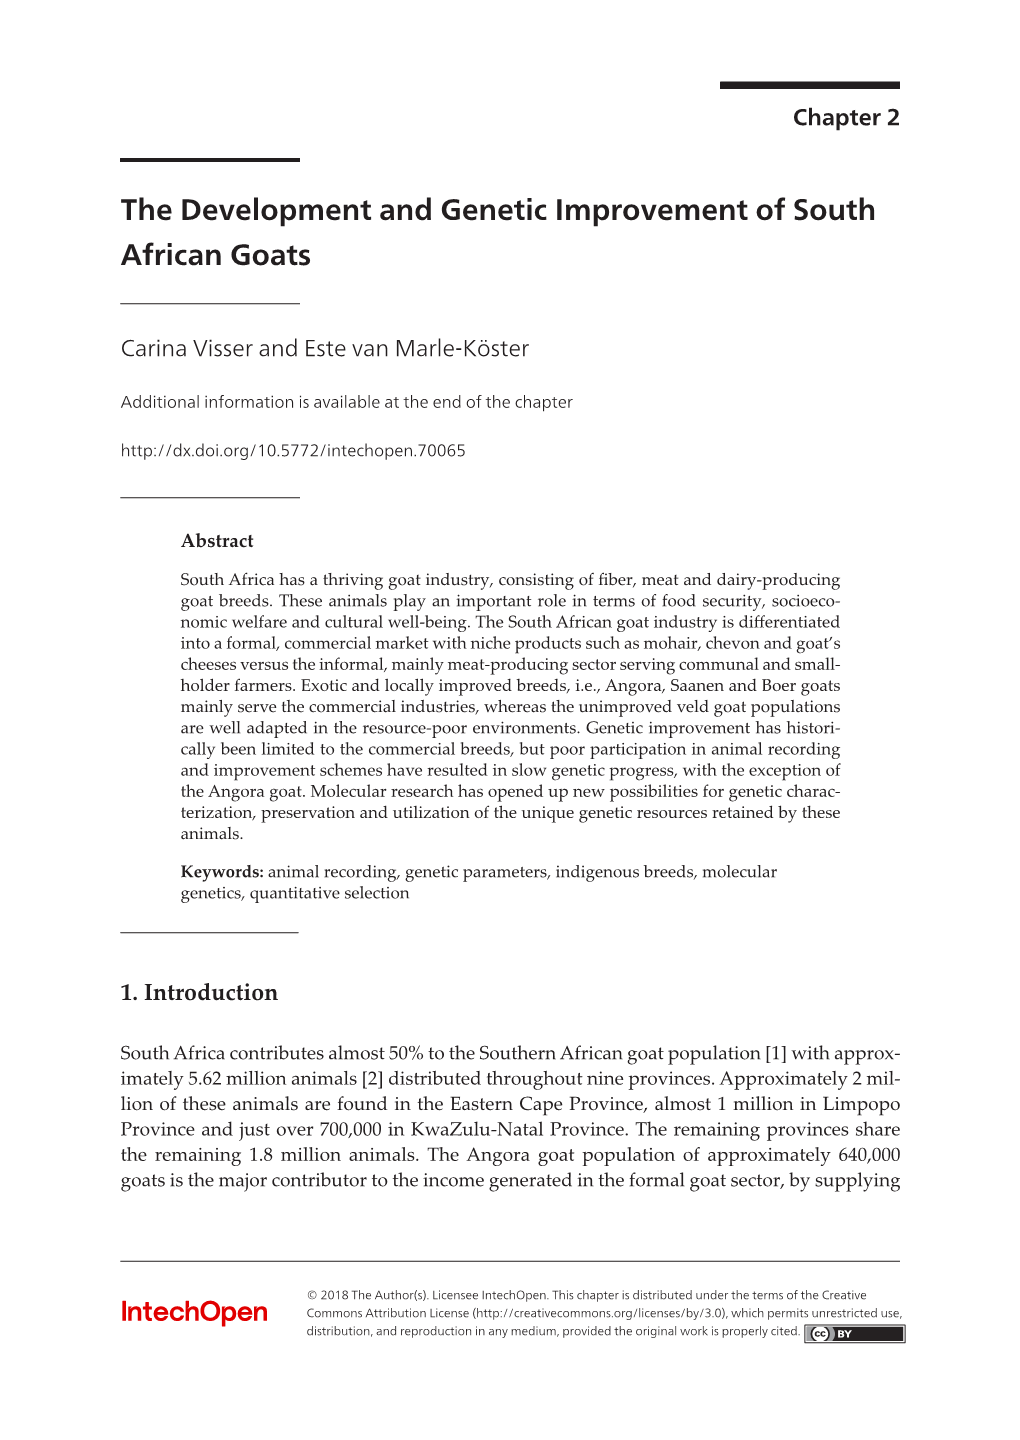 The Development and Genetic Improvement of South African Goats 21